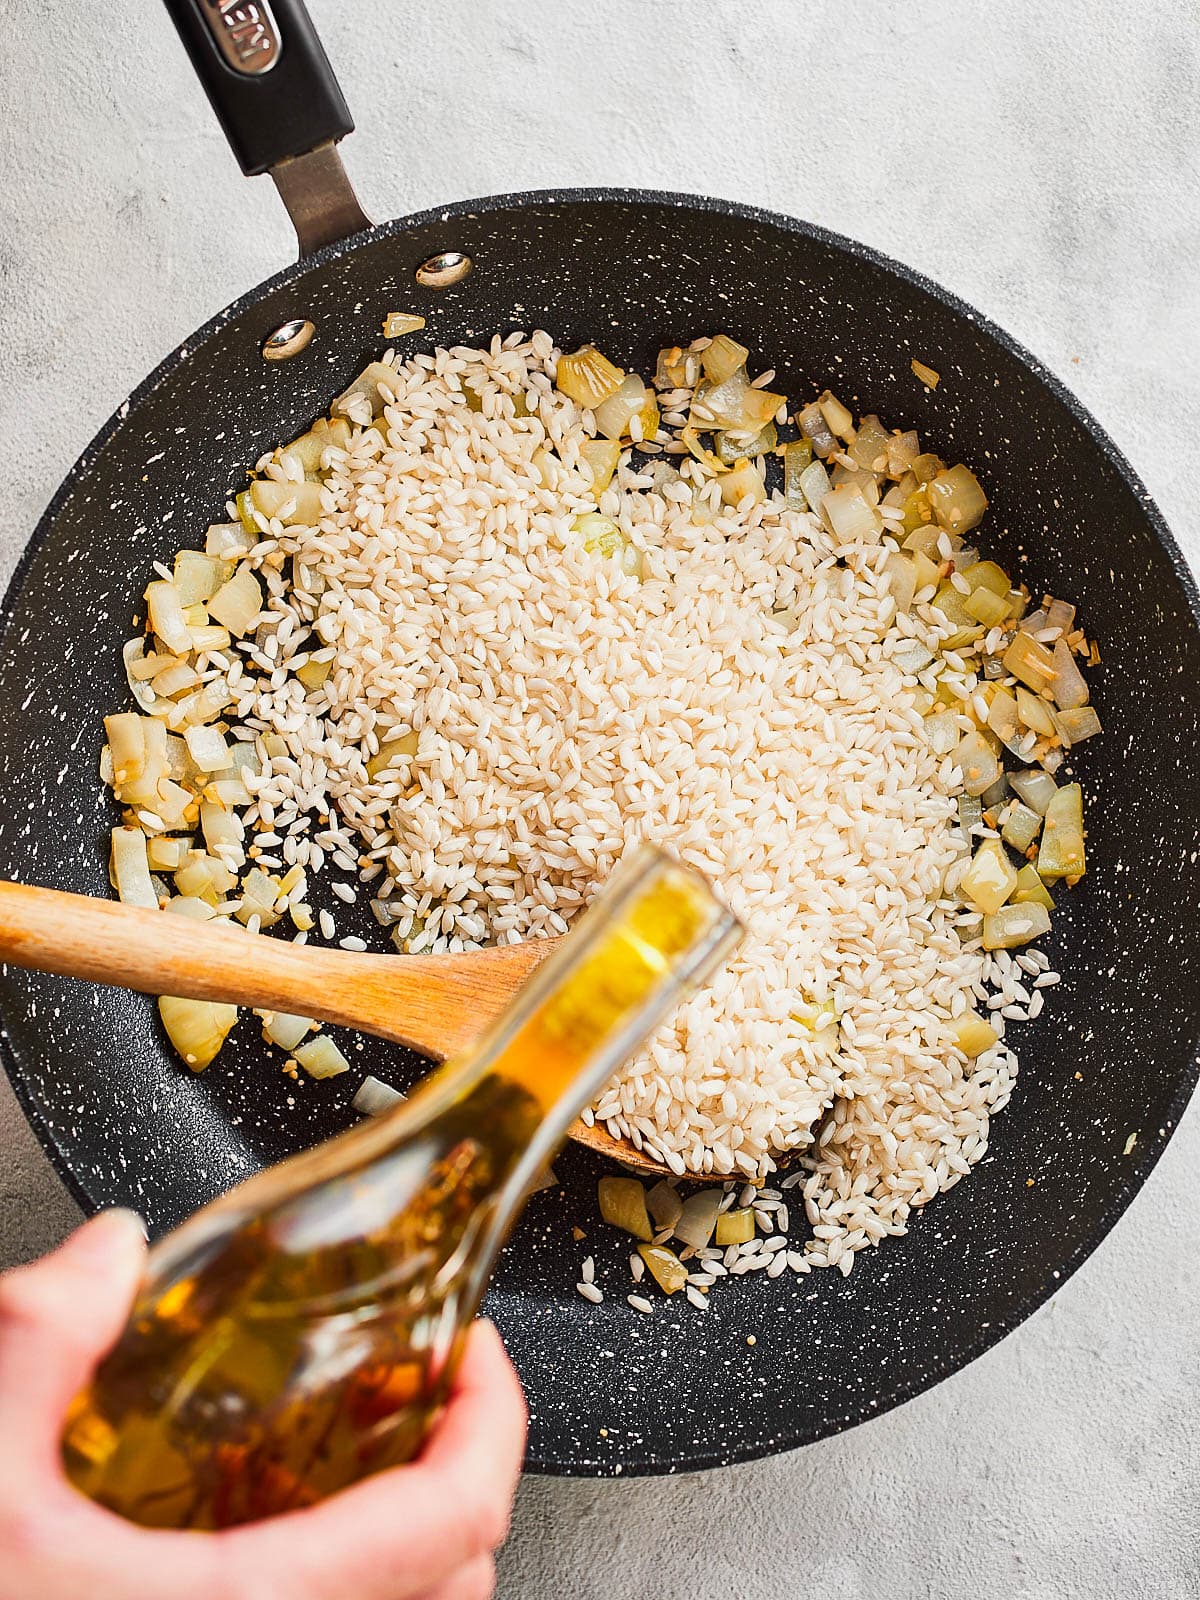 Adding olive oil into the pan to separate the grains